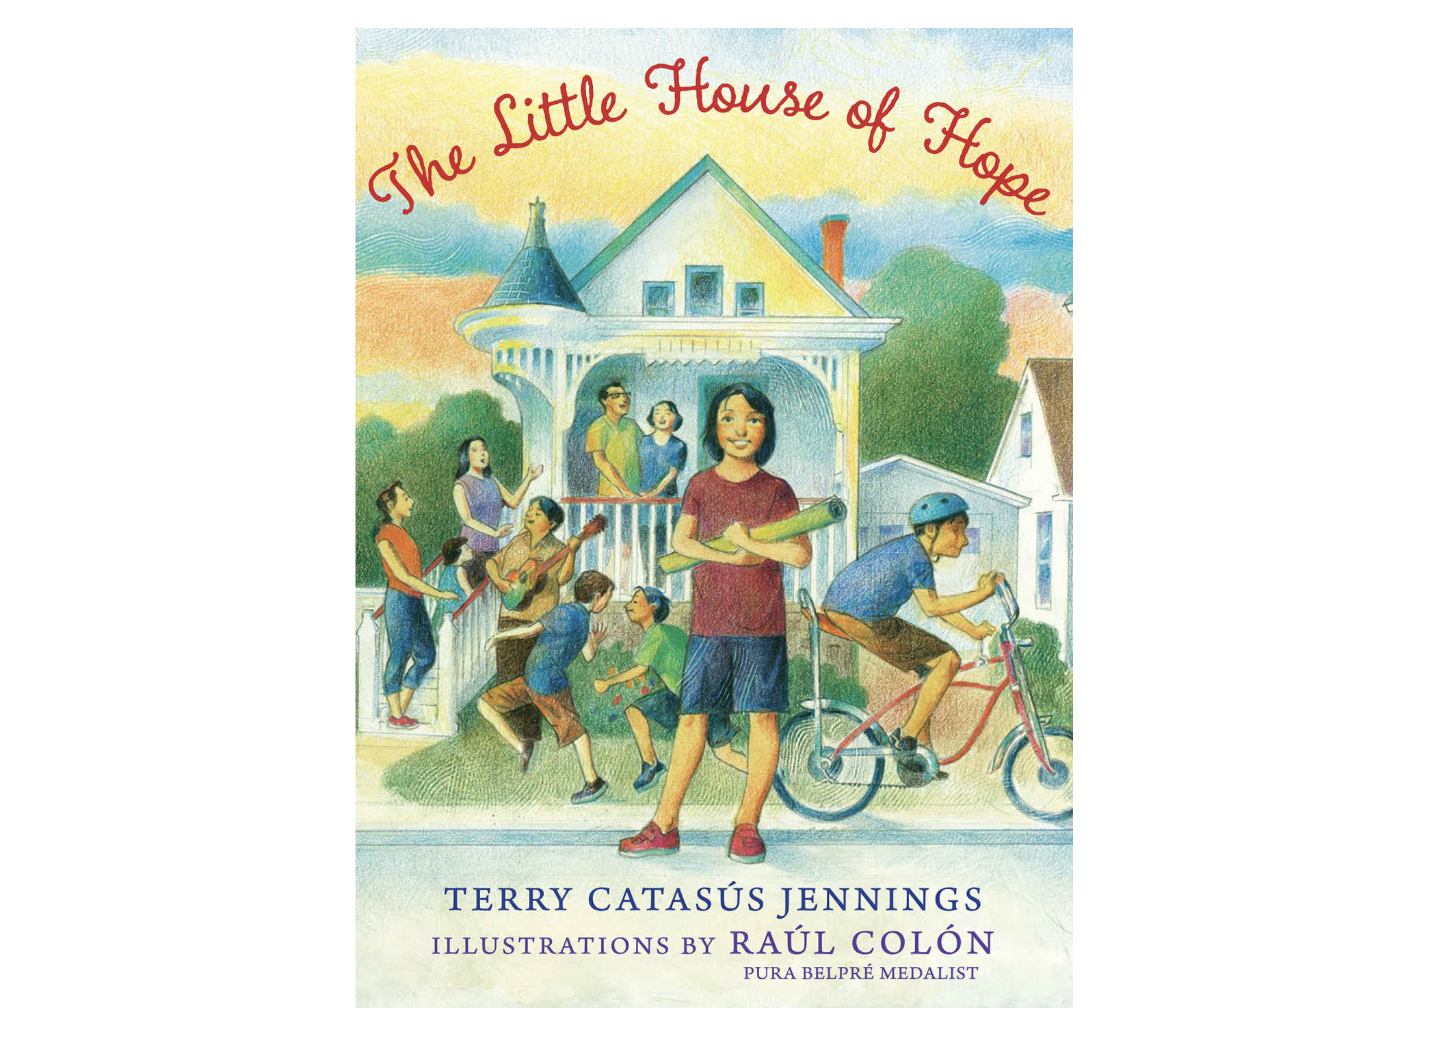 'The Little House of Hope' Terry Catasus Jennings and illustrated by Raul Colon